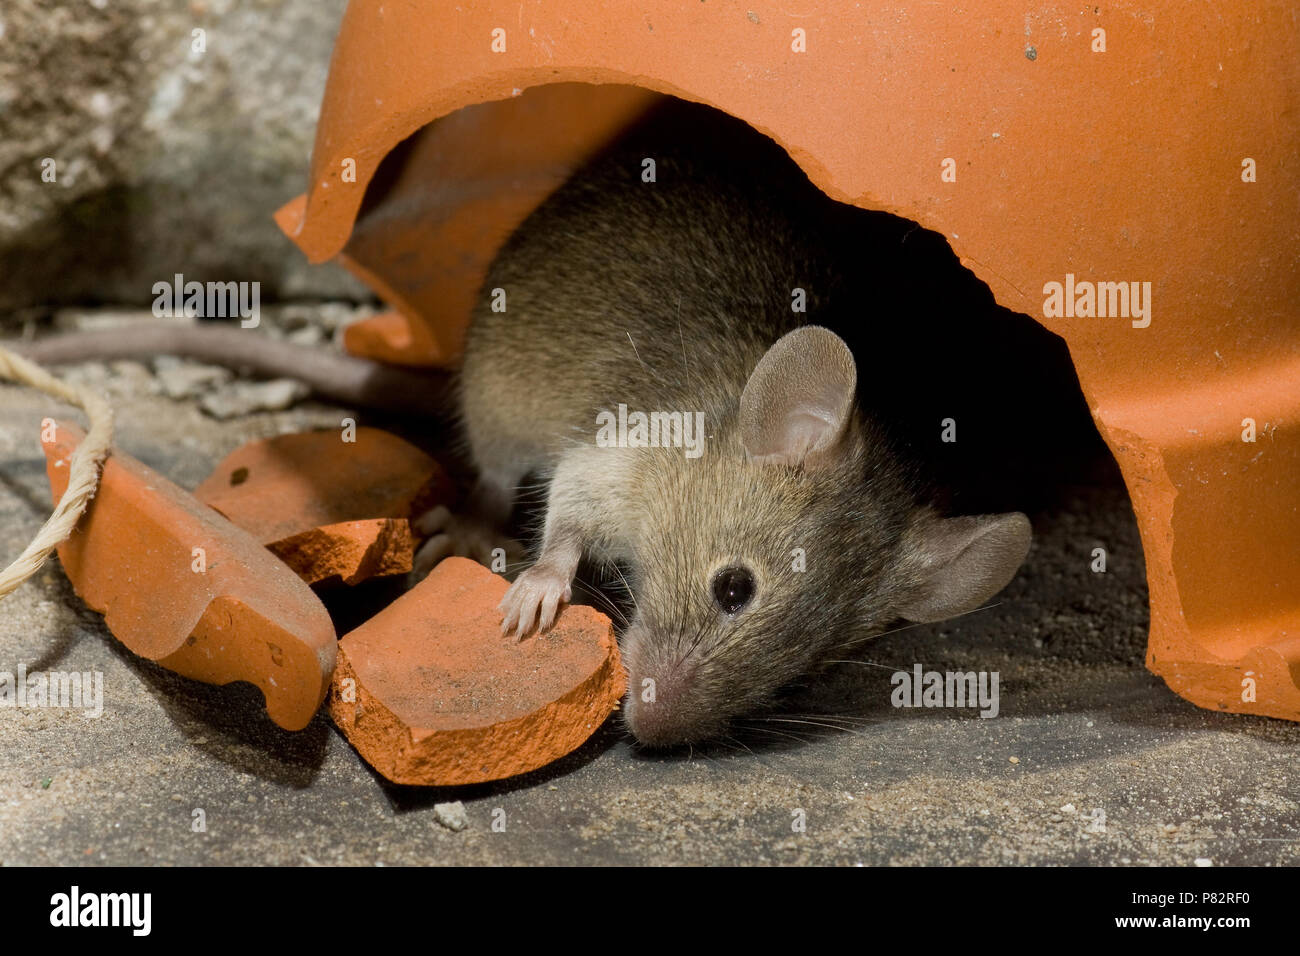 Huismuis in huis; House Mouse in house Stock Photo